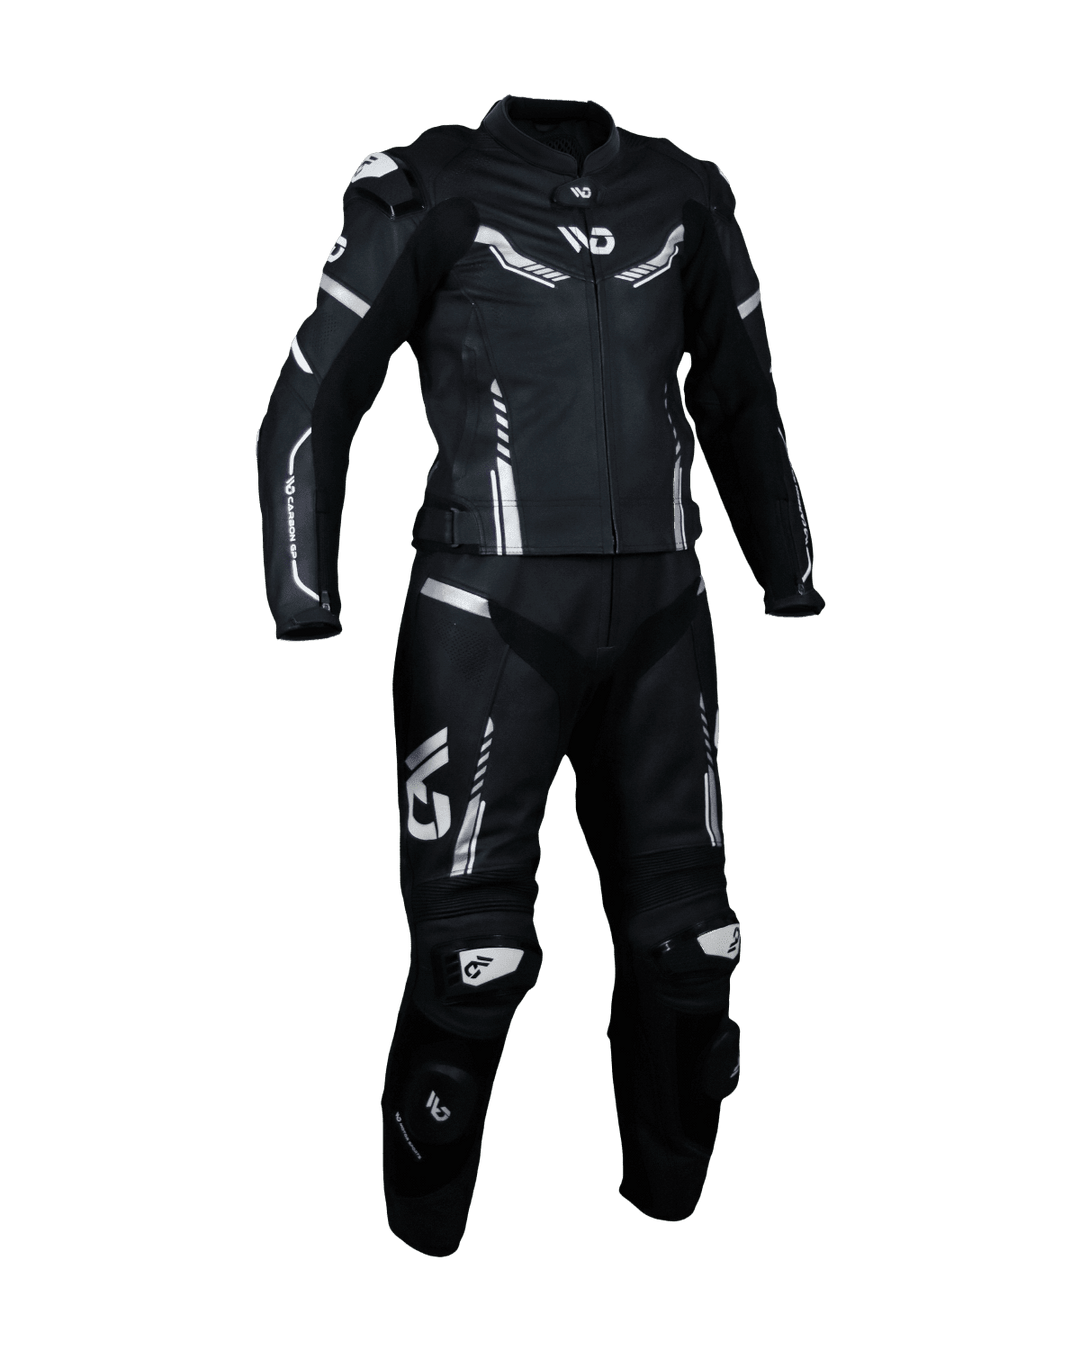 WD CARBON GP 2-PC - Grey - Motorcycle Leather Suit - Front View